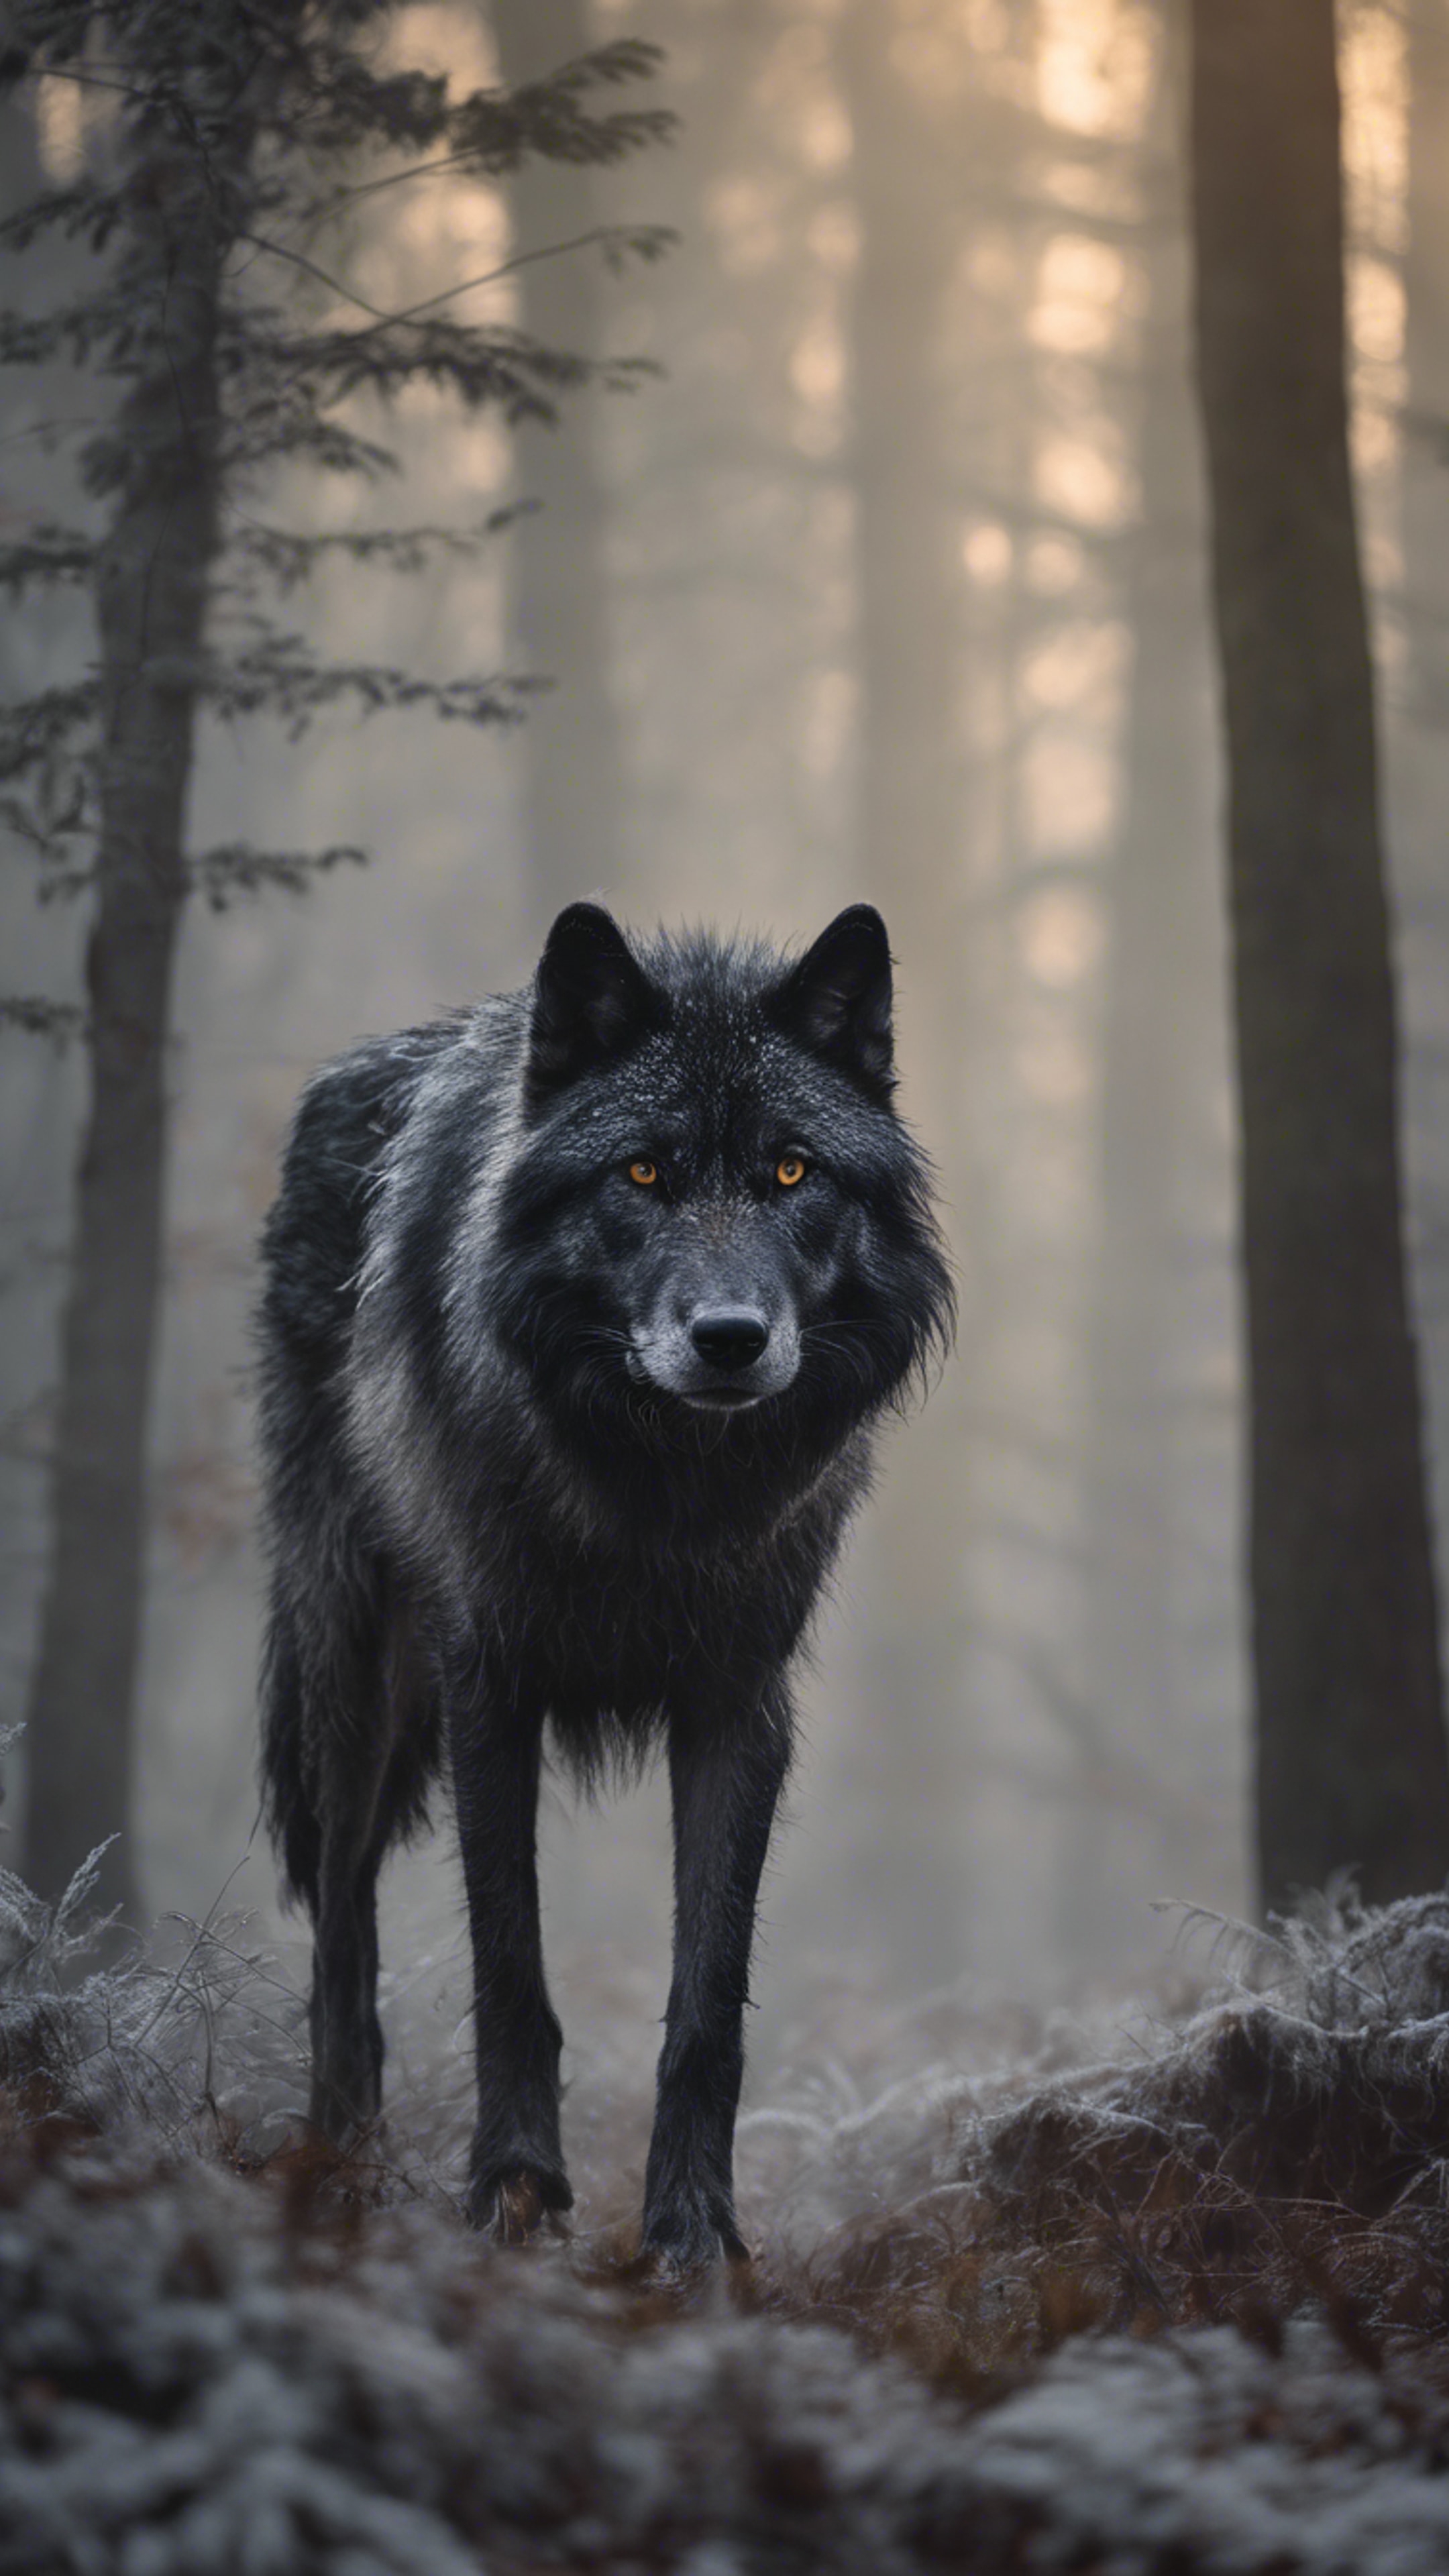 A cool black and gray shaggy wolf prowling through a mist-filled forest at dawn. Behang[e0adfa1209b347ac9a7e]